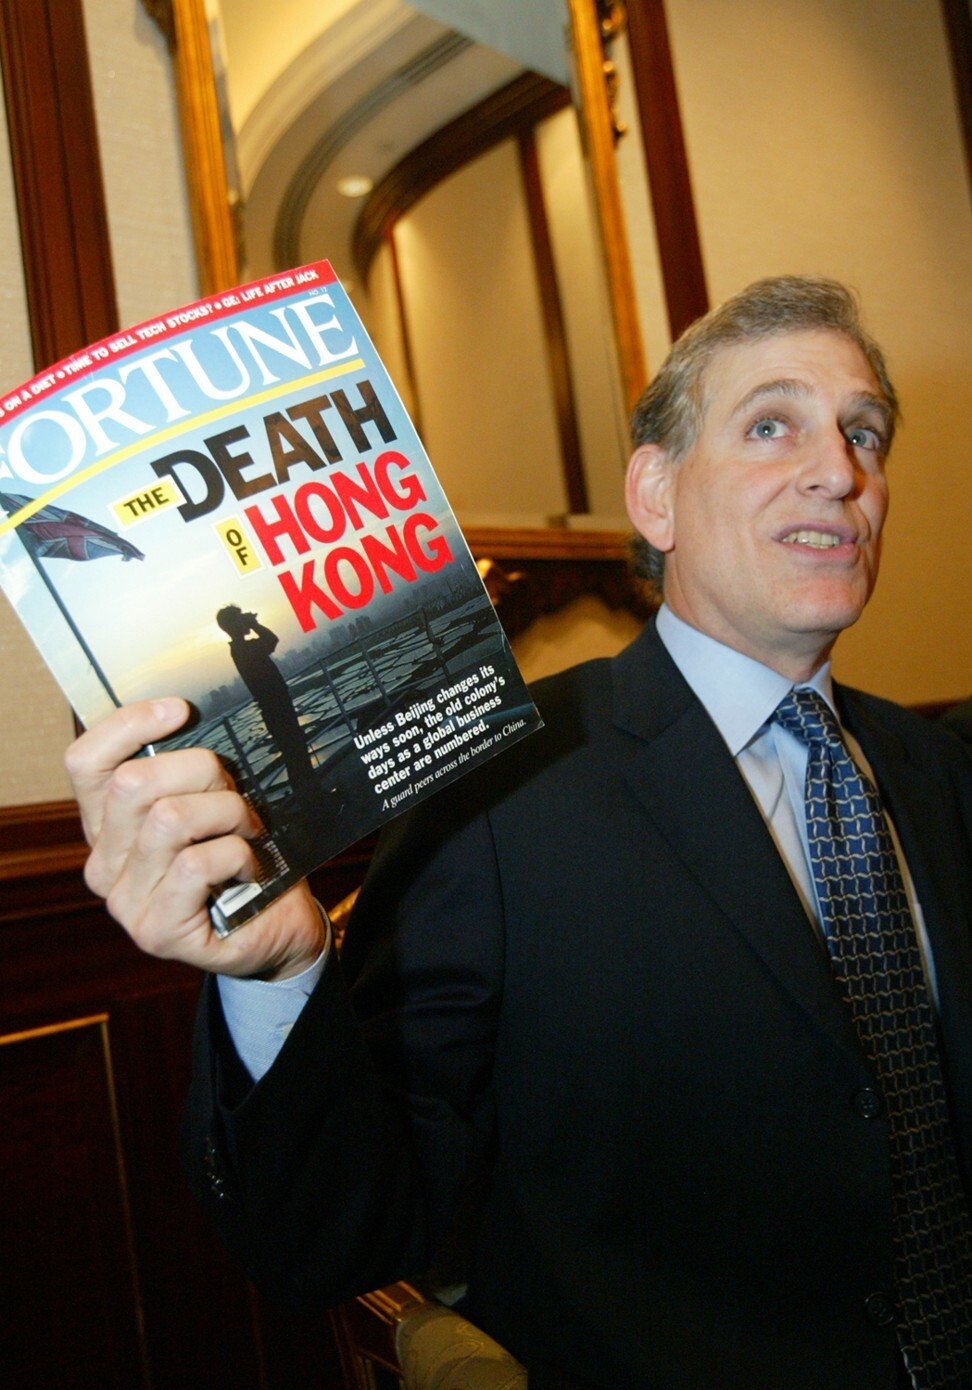 Then American Chamber of Commerce chairman Steve Marcopoto holds up a copy of the July 1997 Fortune magazine edition with the cover “The Death of Hong Kong” during a lunch in Pacific Place on January 18, 2006. By then, many of the worst predictions for Hong Kong had failed to materialise. Photo: David Wong